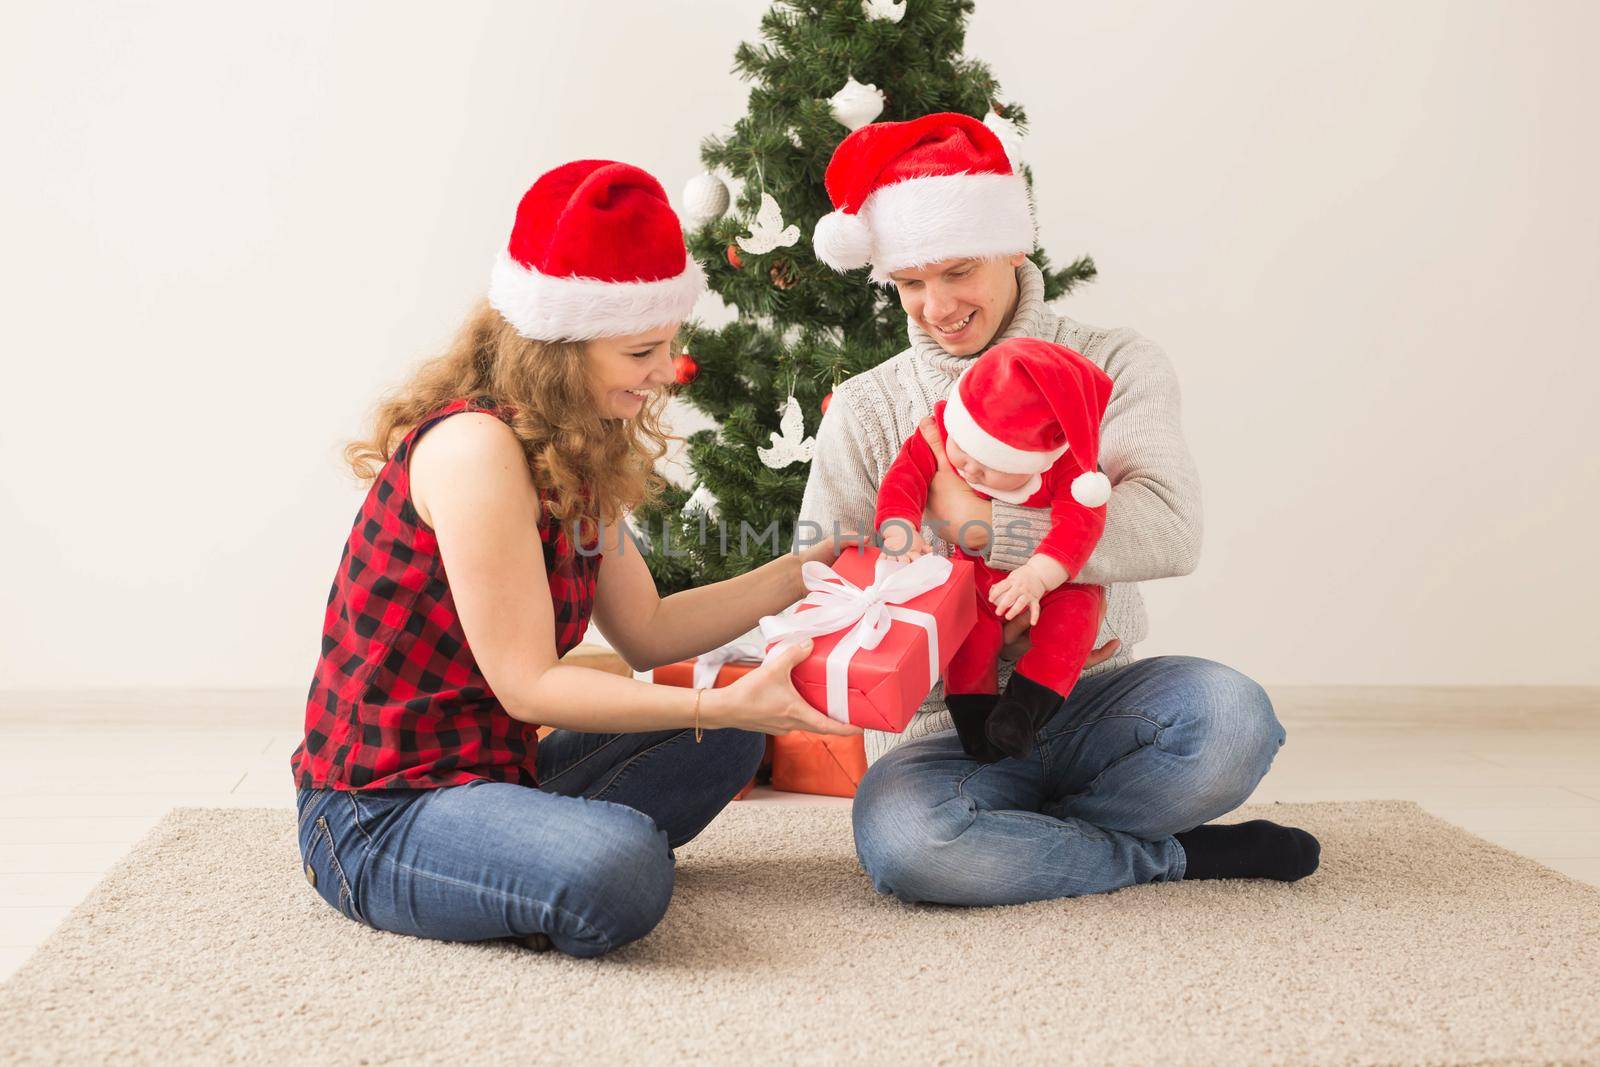 Holidays, children and family concept - Happy couple with baby celebrating Christmas together at home. by Satura86